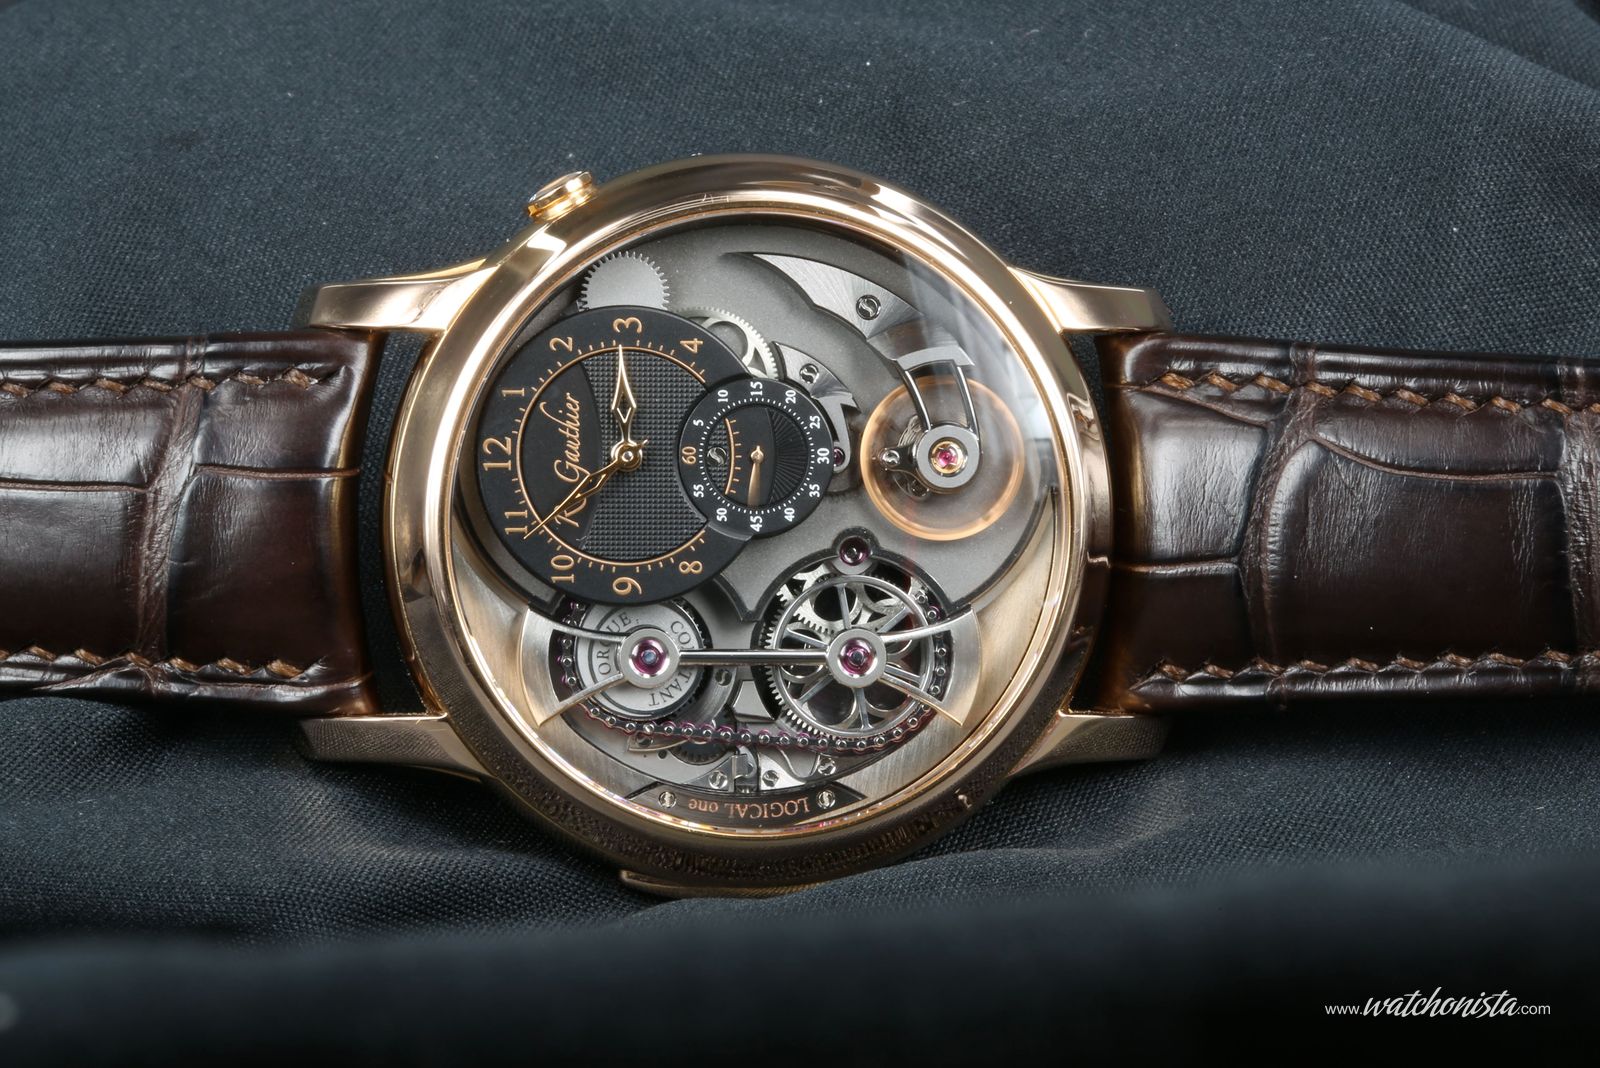 The Logical One by Romain Gauthier: a creator journey | Watchonista